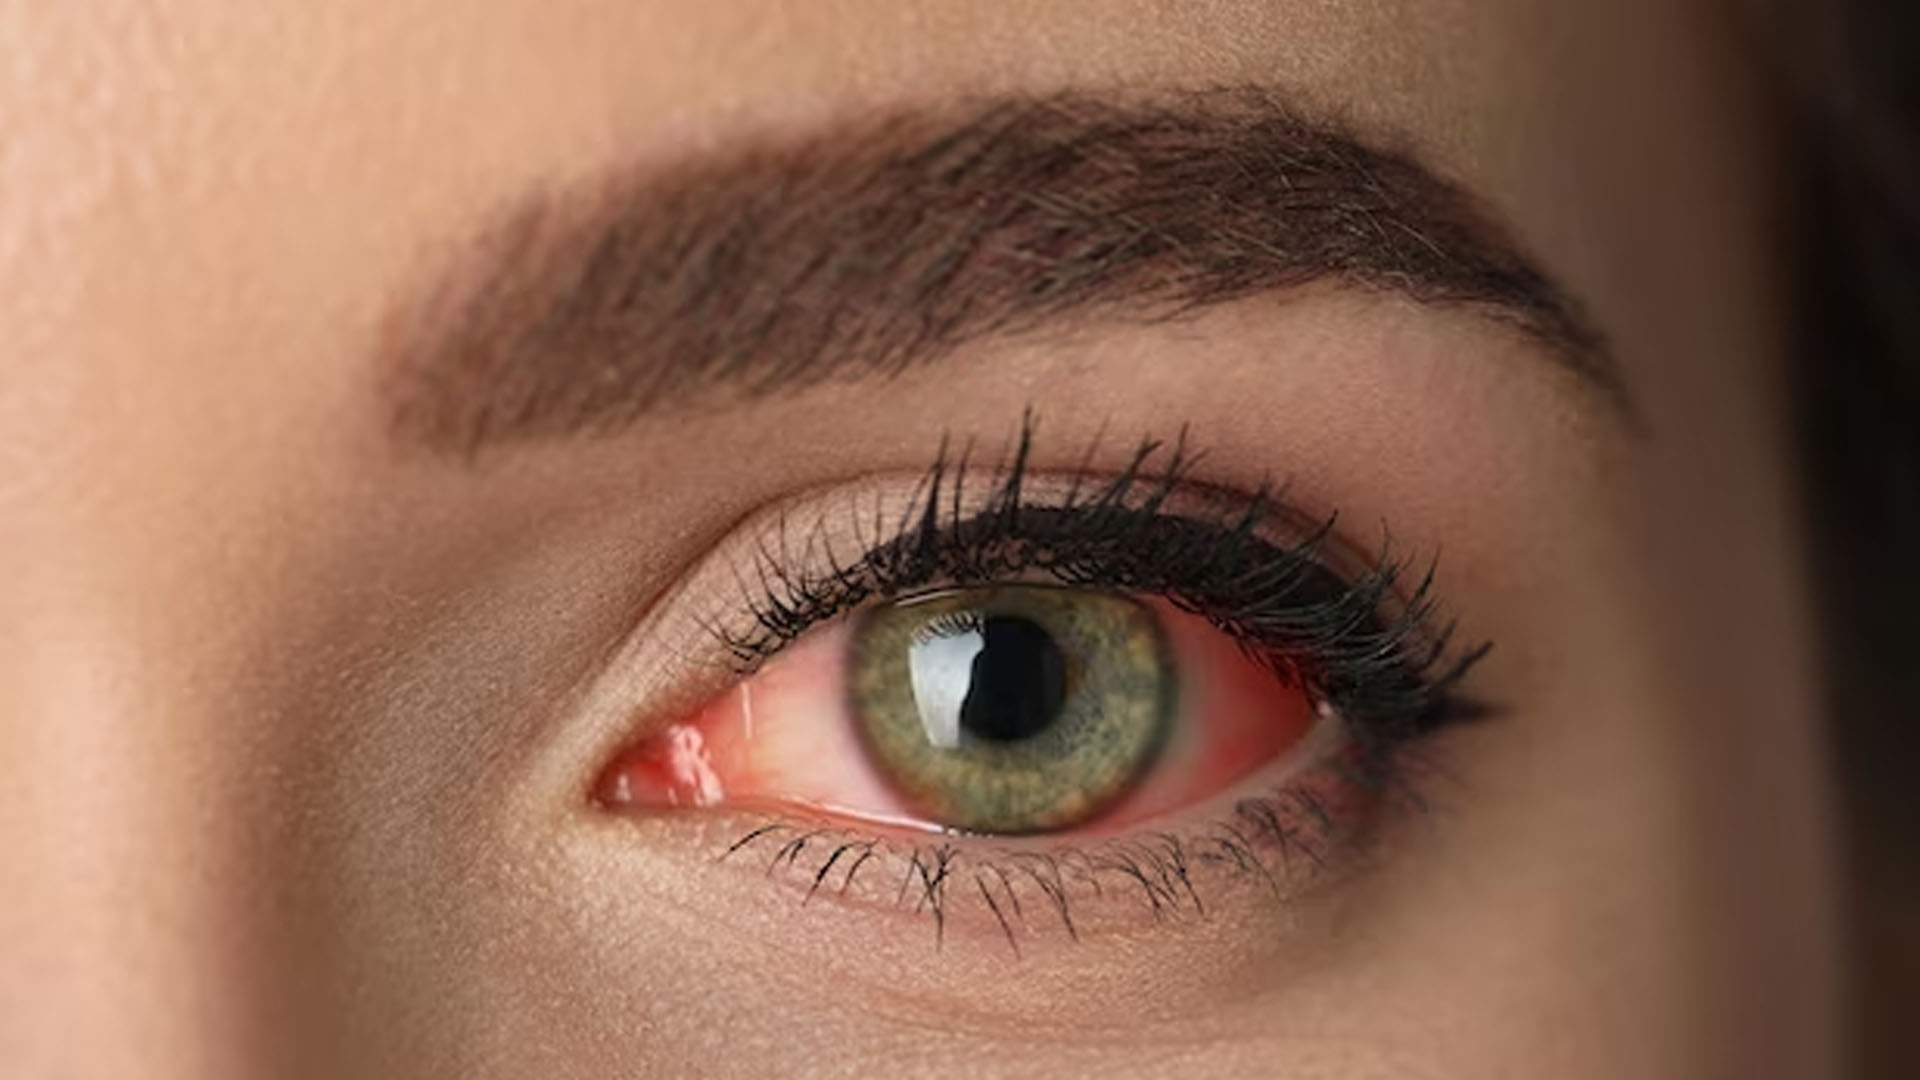 What are the Home Remedies for Conjuctivitis?